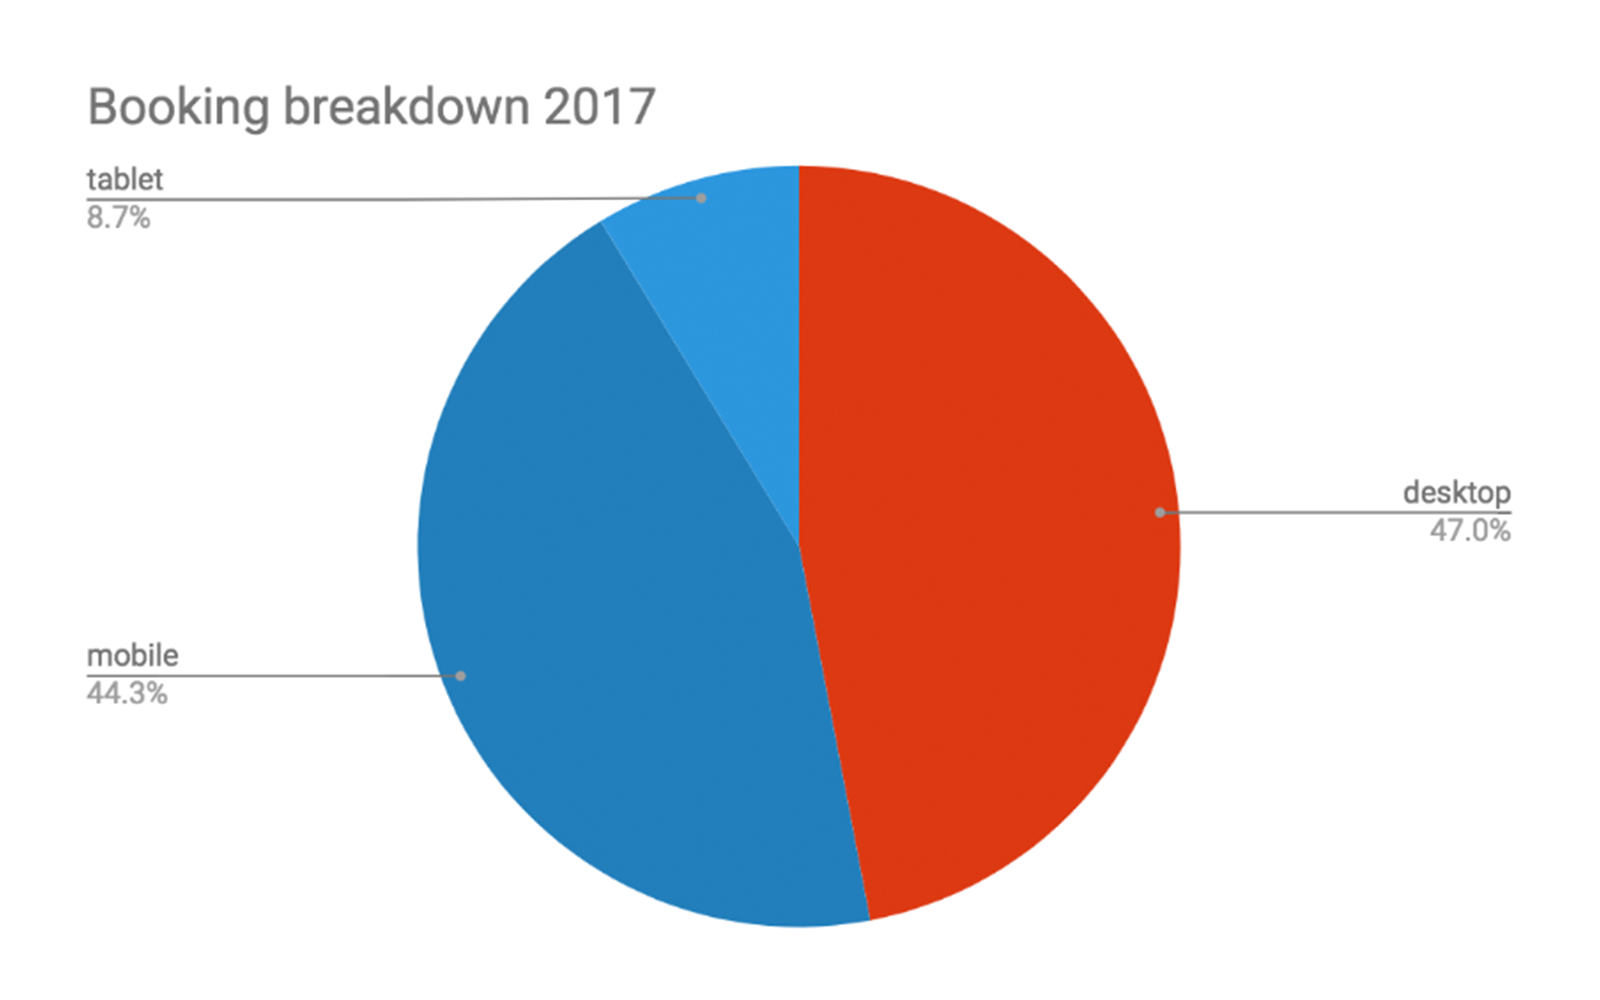 Booking breakdown pie chart with mobile at 44.3% and desktop at 47.%